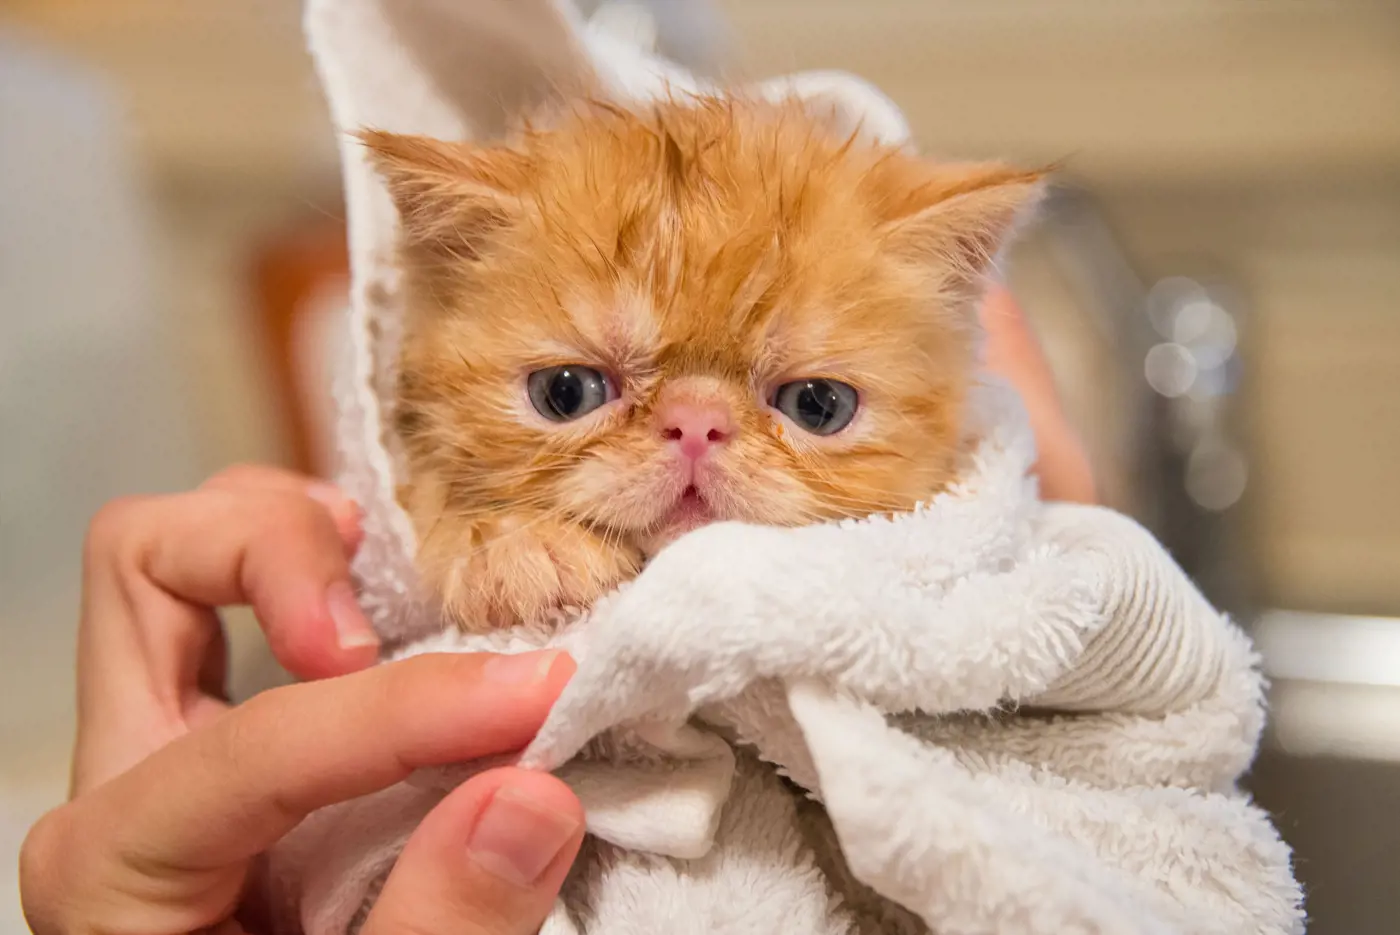 A damp kitten wrapped in a towel